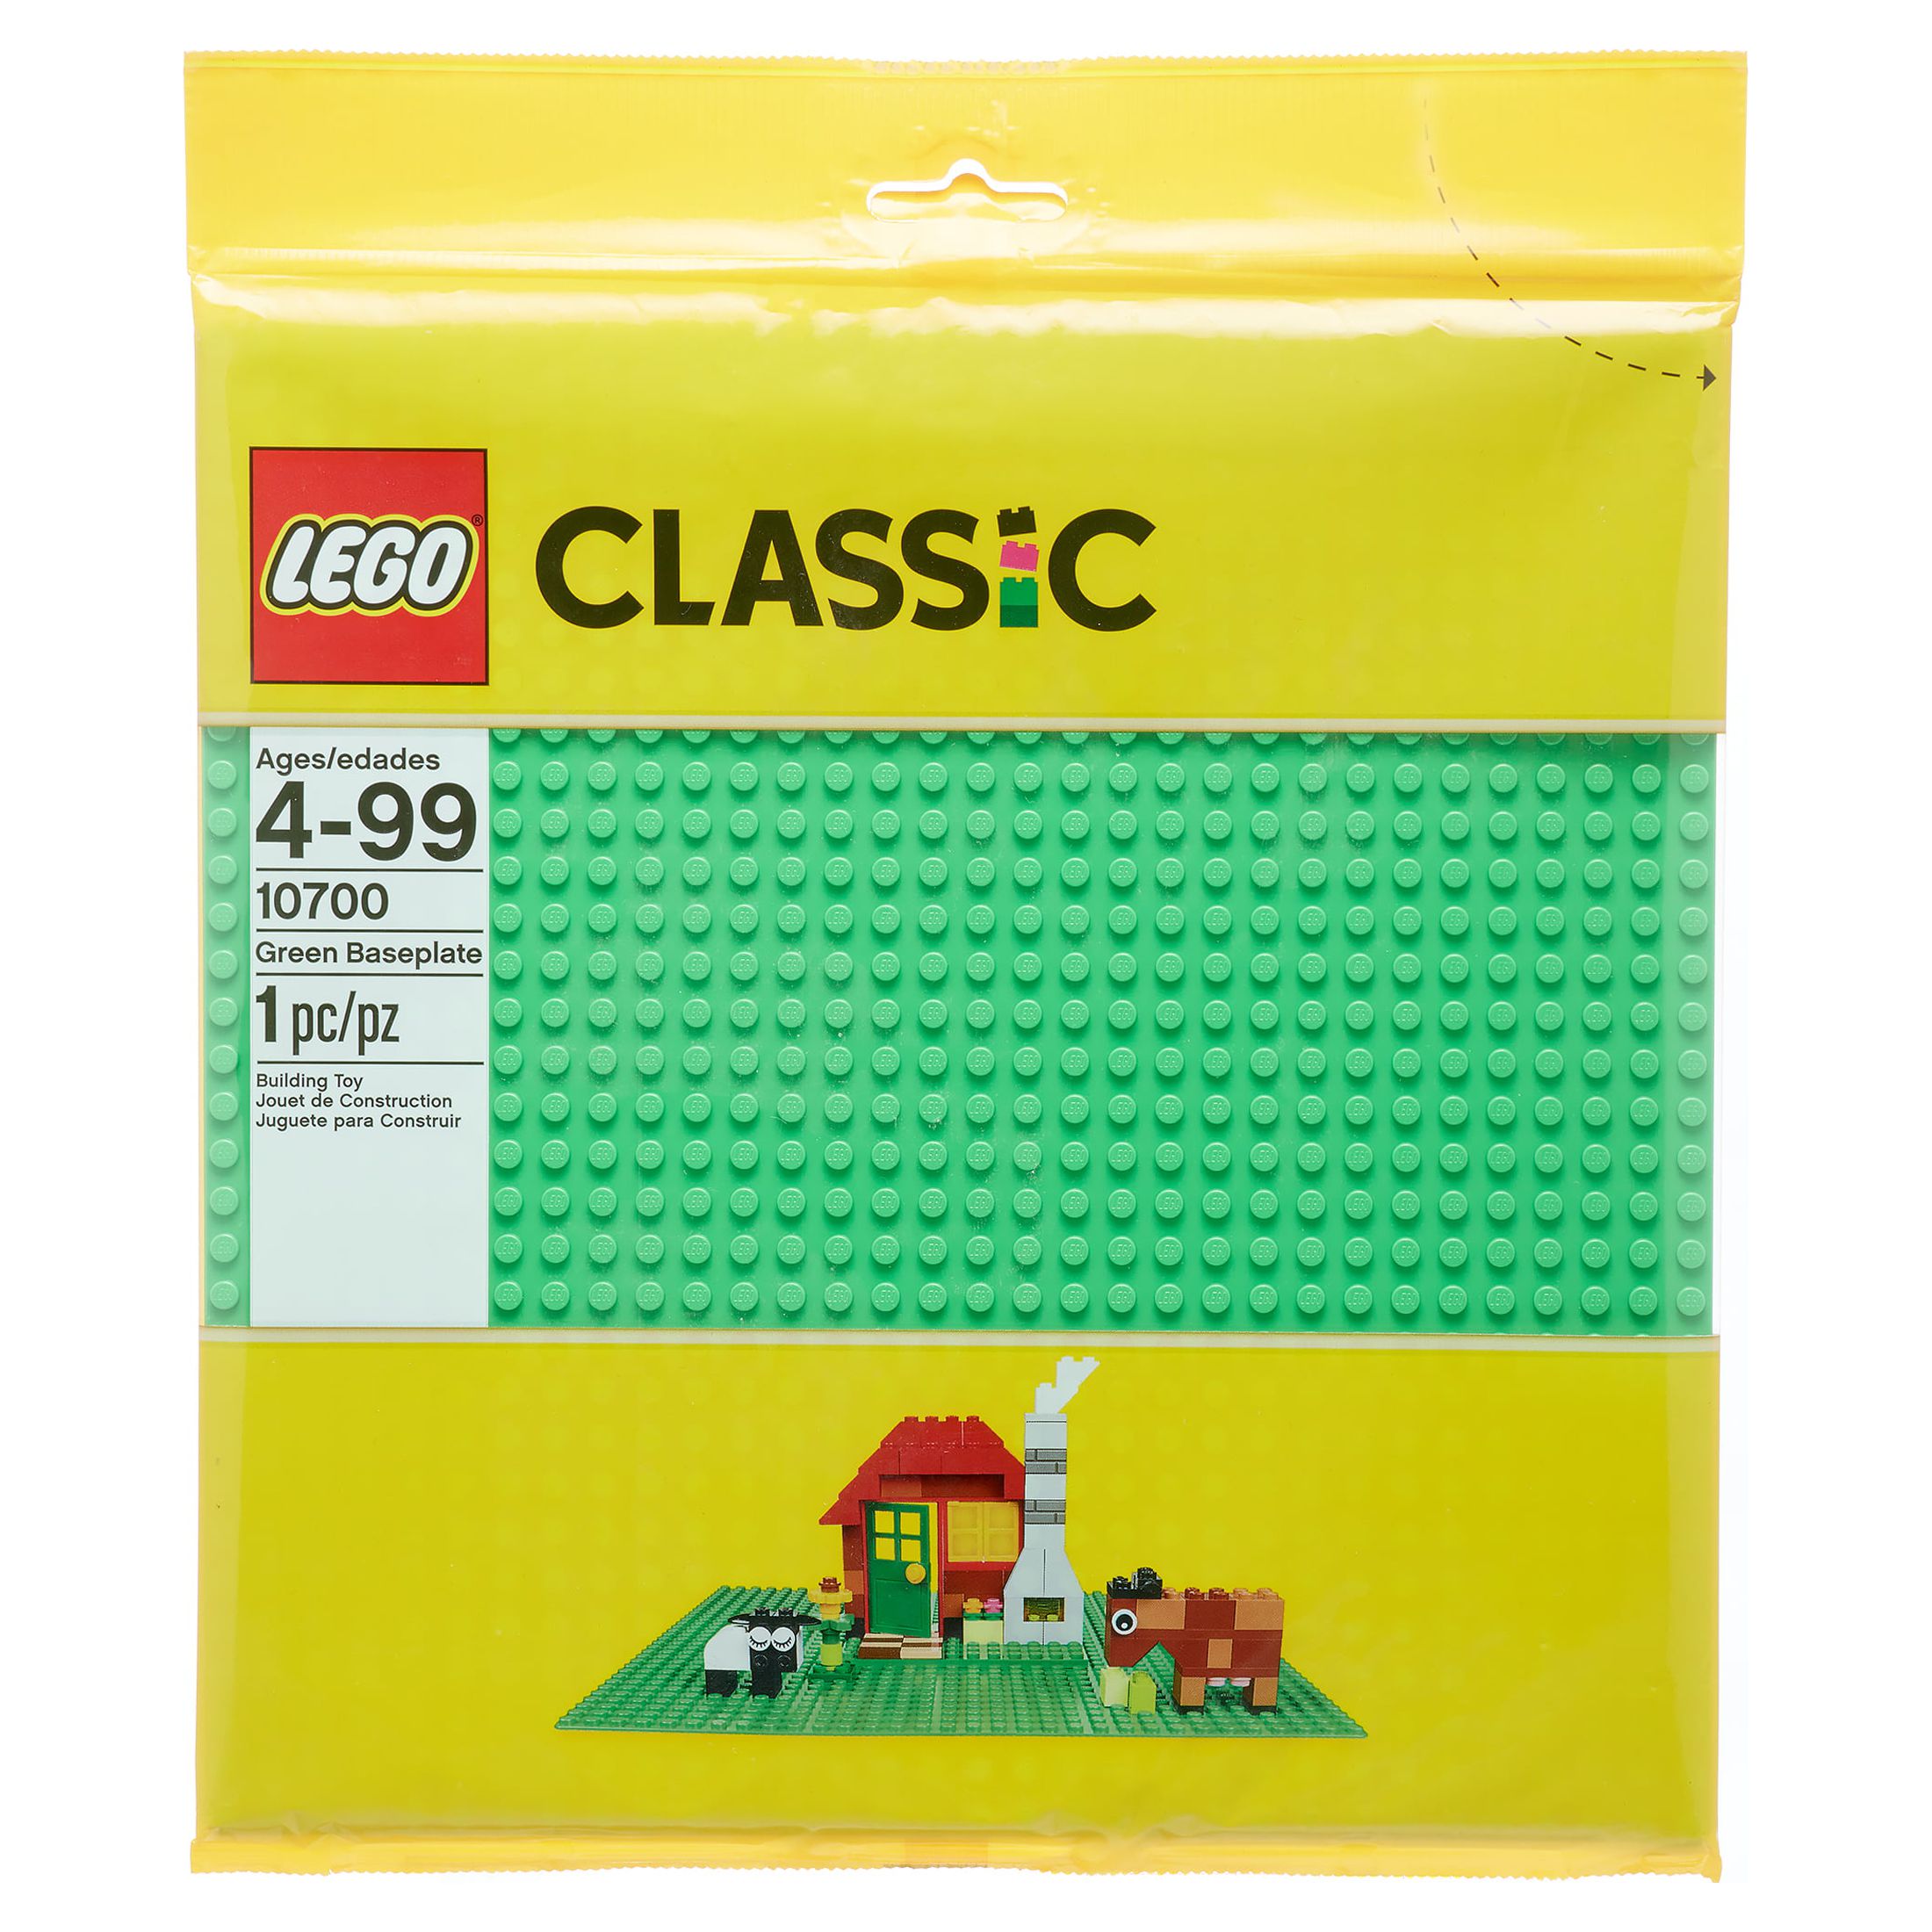 LEGO Classic Green Baseplate 10700 Building Accessory (1 Piece) - image 3 of 6